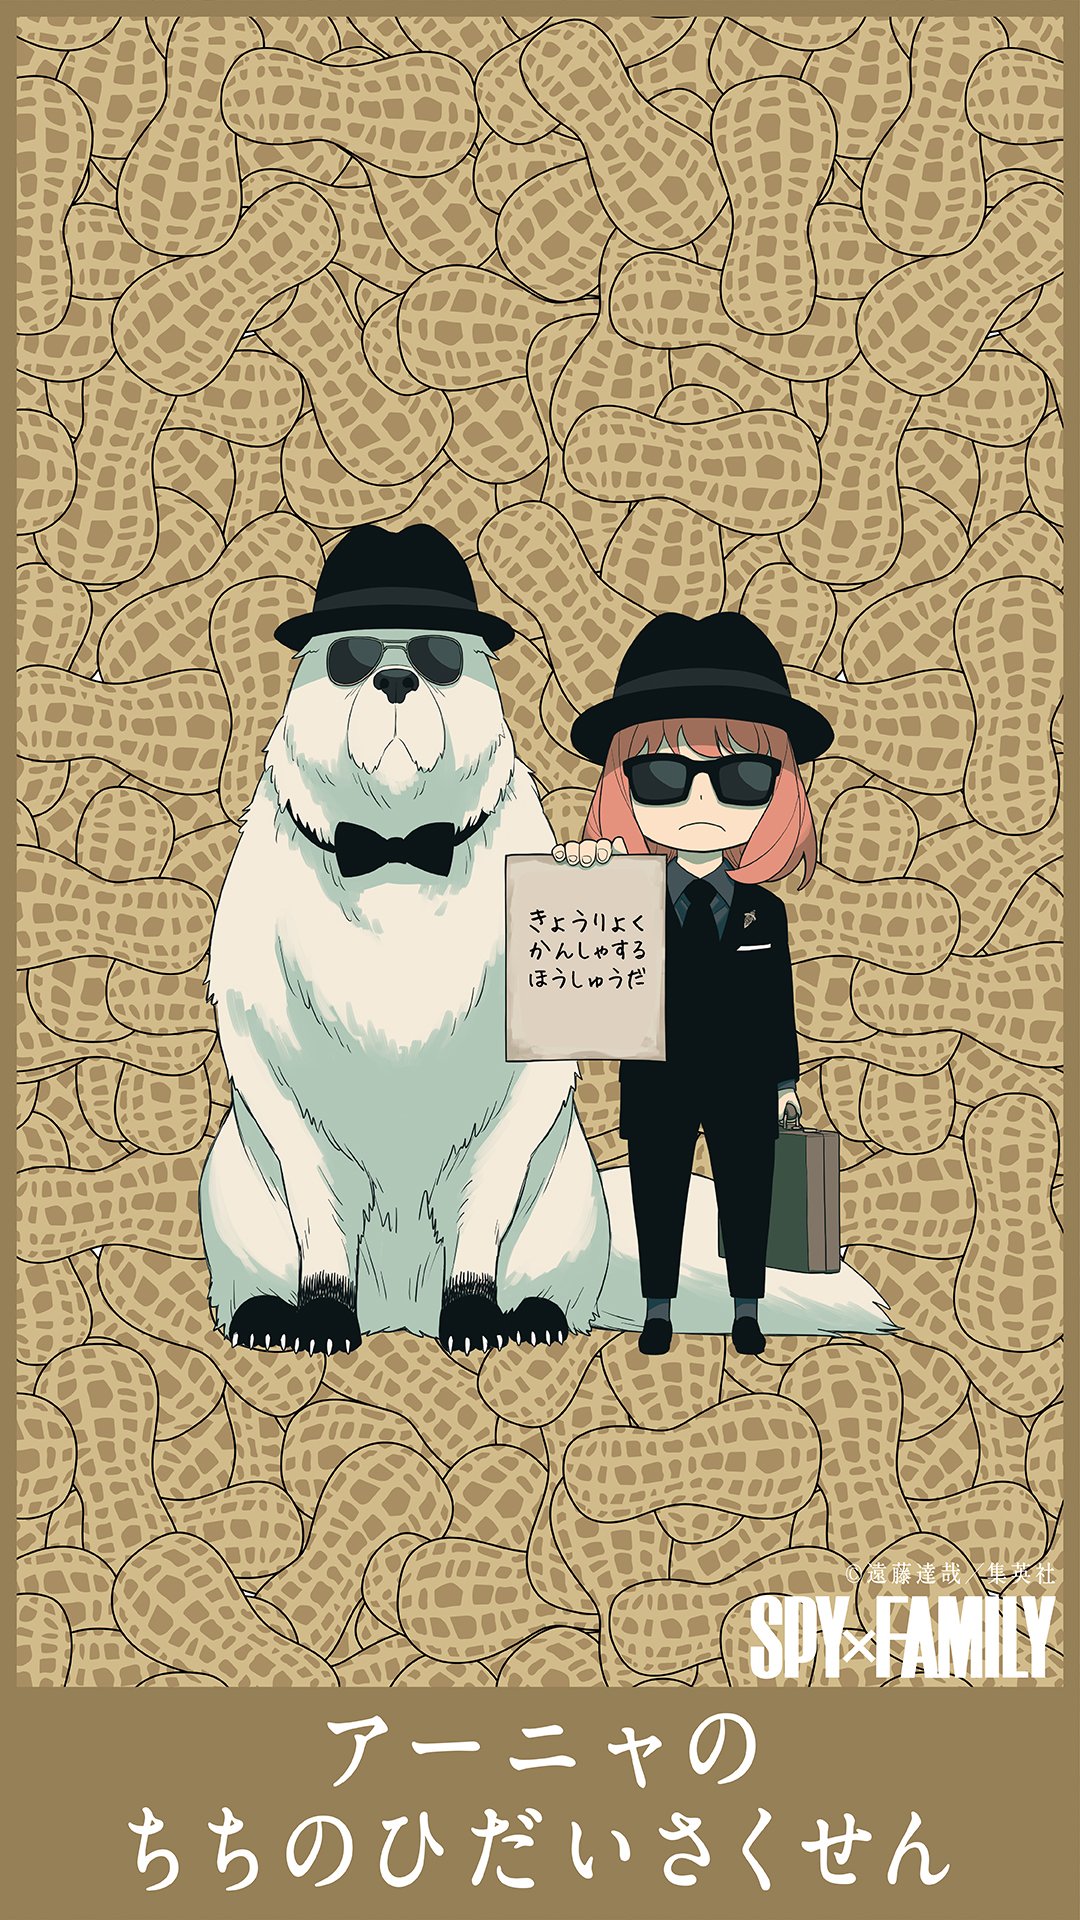 SPY x FAMILY is starting a special campaign on the way to Father's Day 〜 Anime Sweet